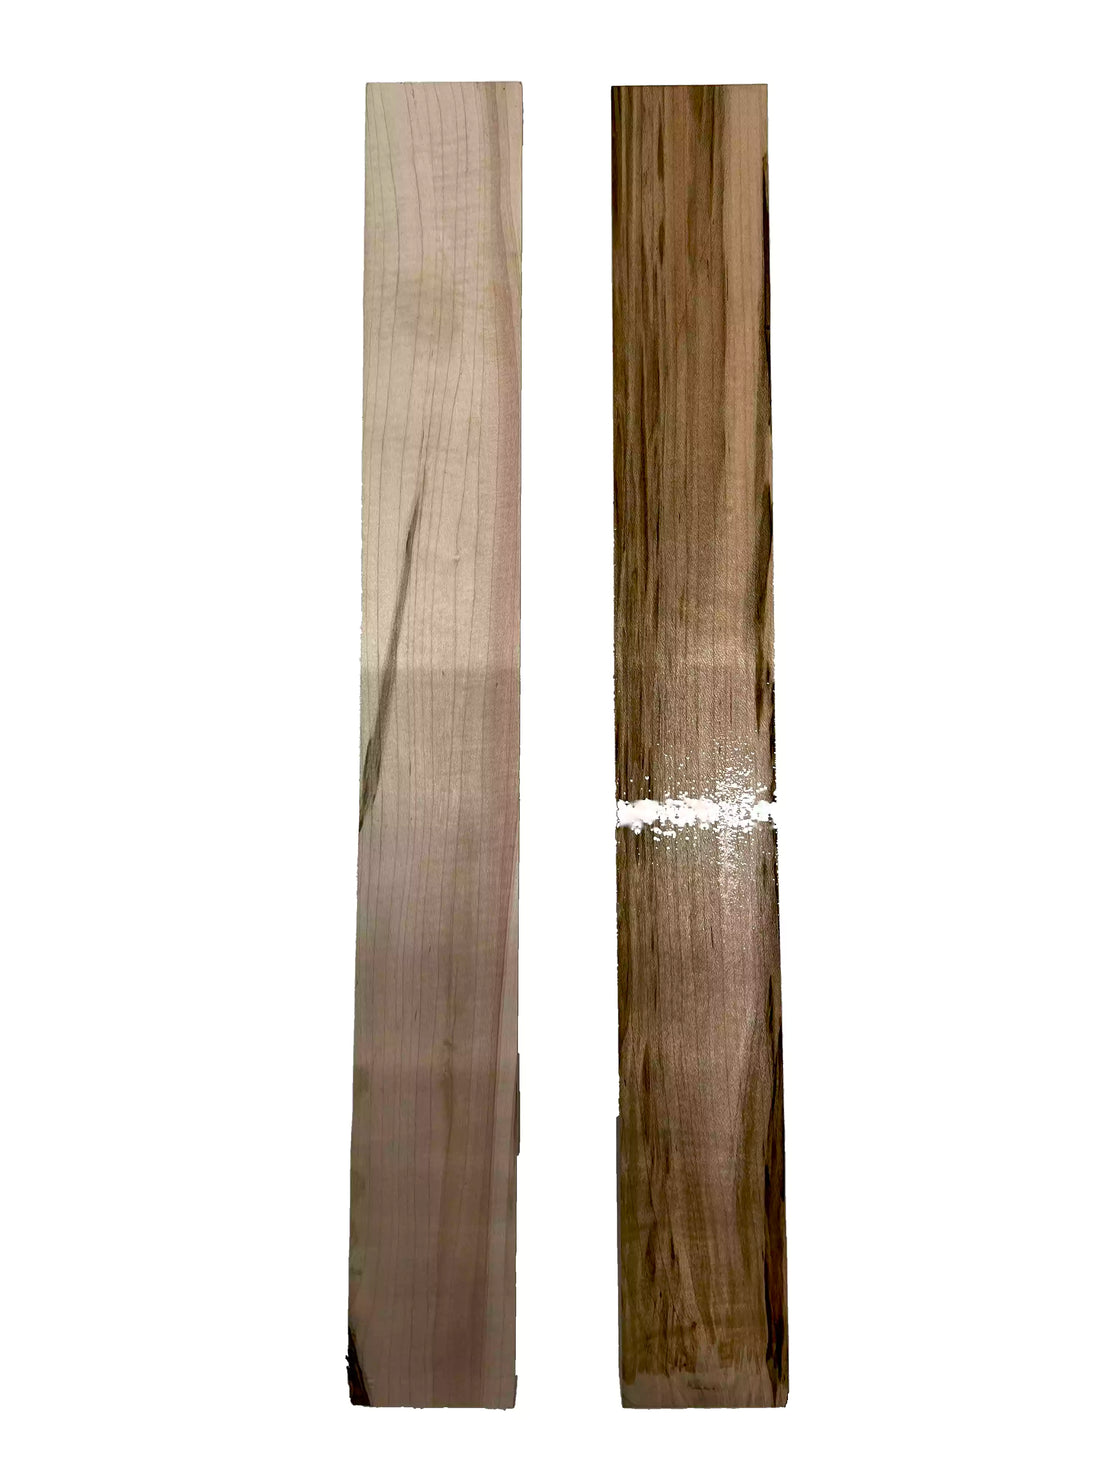 Pack of 2, Ambrosia Maple Thin Stock Three Dimensional Lumber Board 16&quot; x 2&quot; x 3/4&quot; 